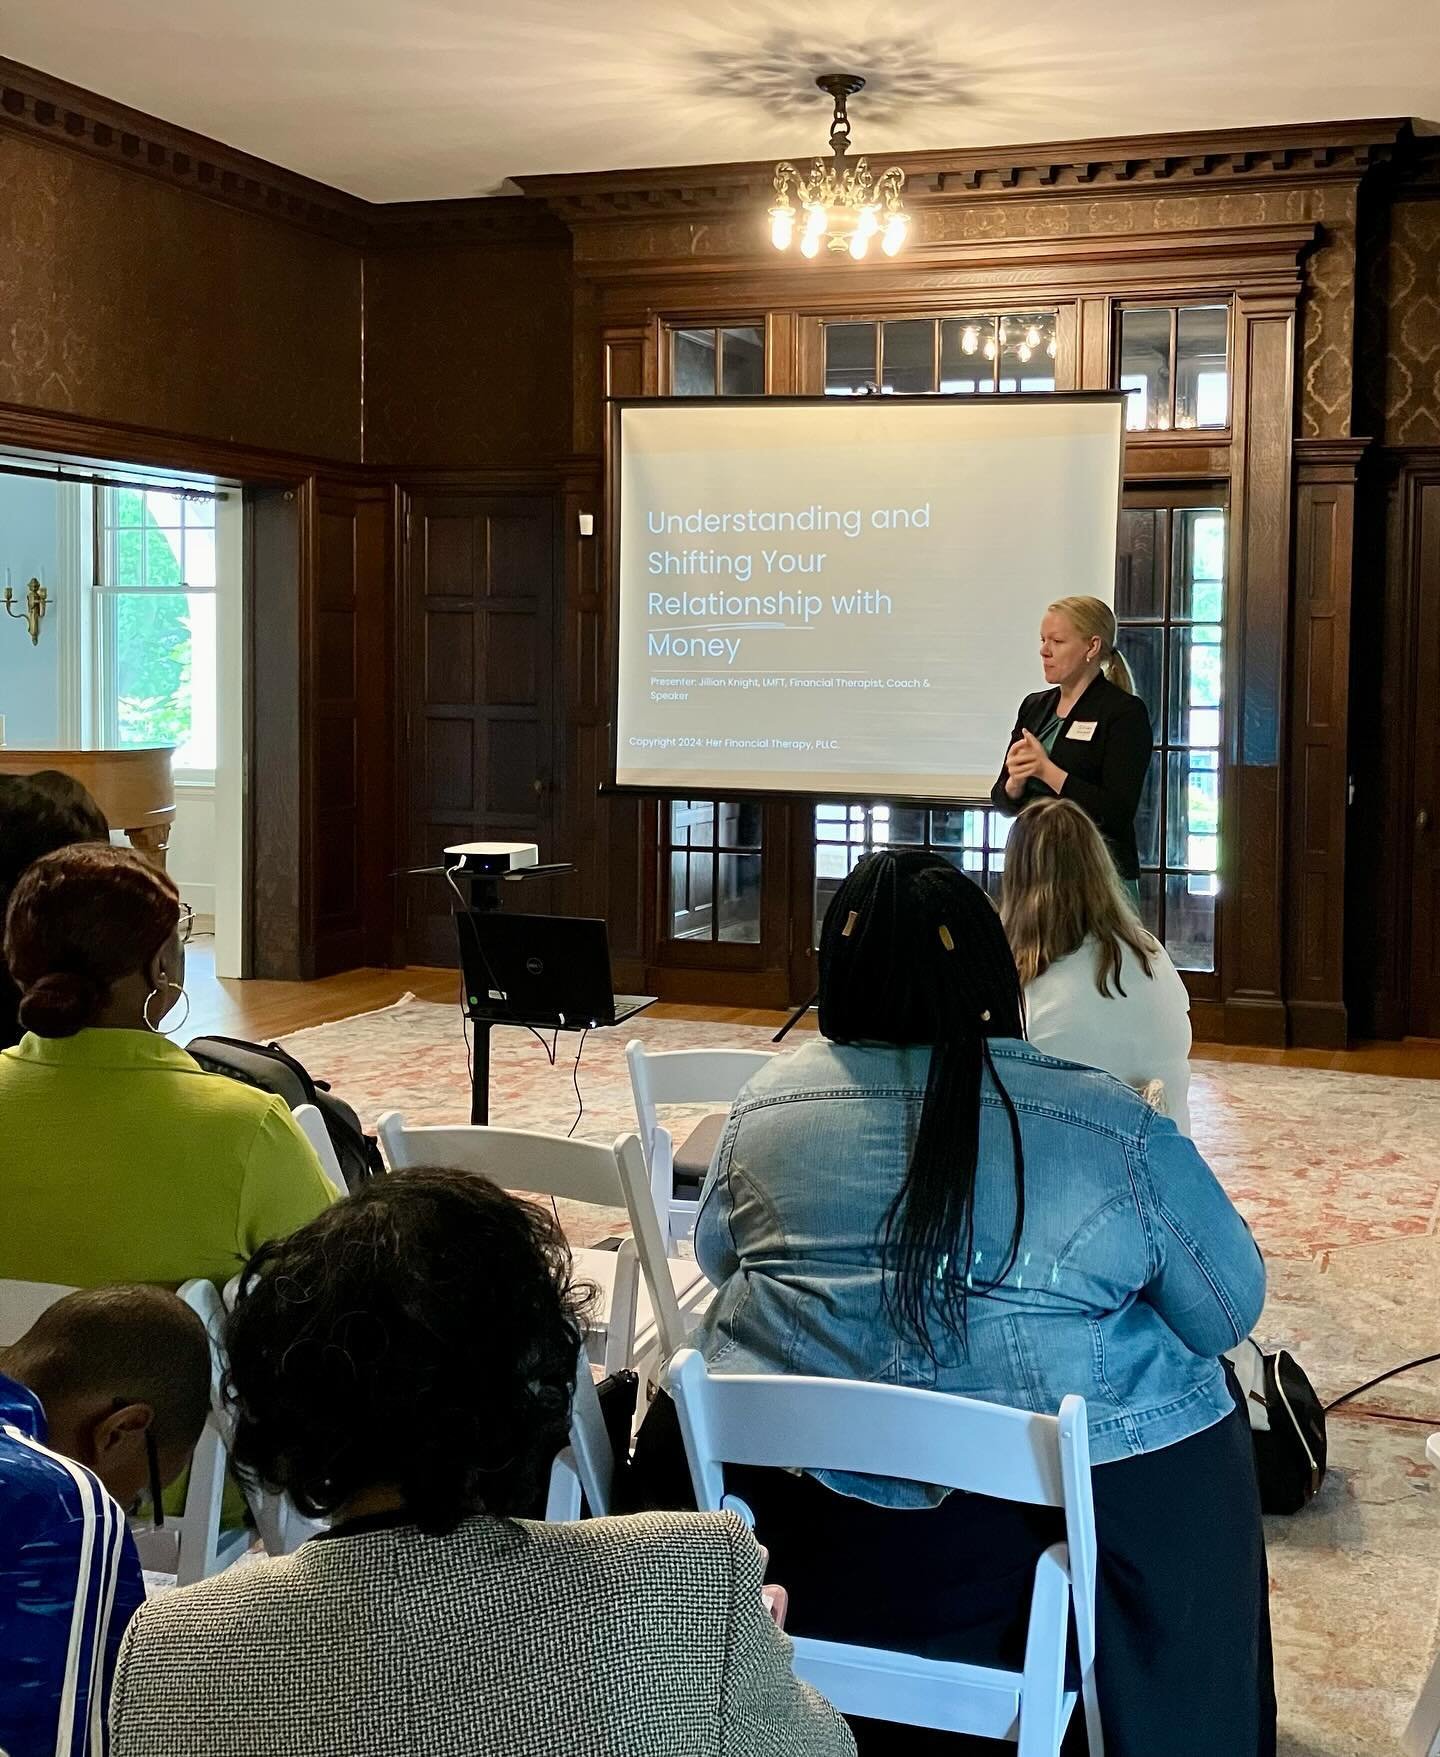 Last weekend I had the opportunity to return to @hillhousedurham to be the opening speaker for the @jlofdoc Financial Resource Fair event. This is a phenomenal group of women 🙏🏻😊

#womenandmoney #financialtherapy #speaker #relationshipwithmoney